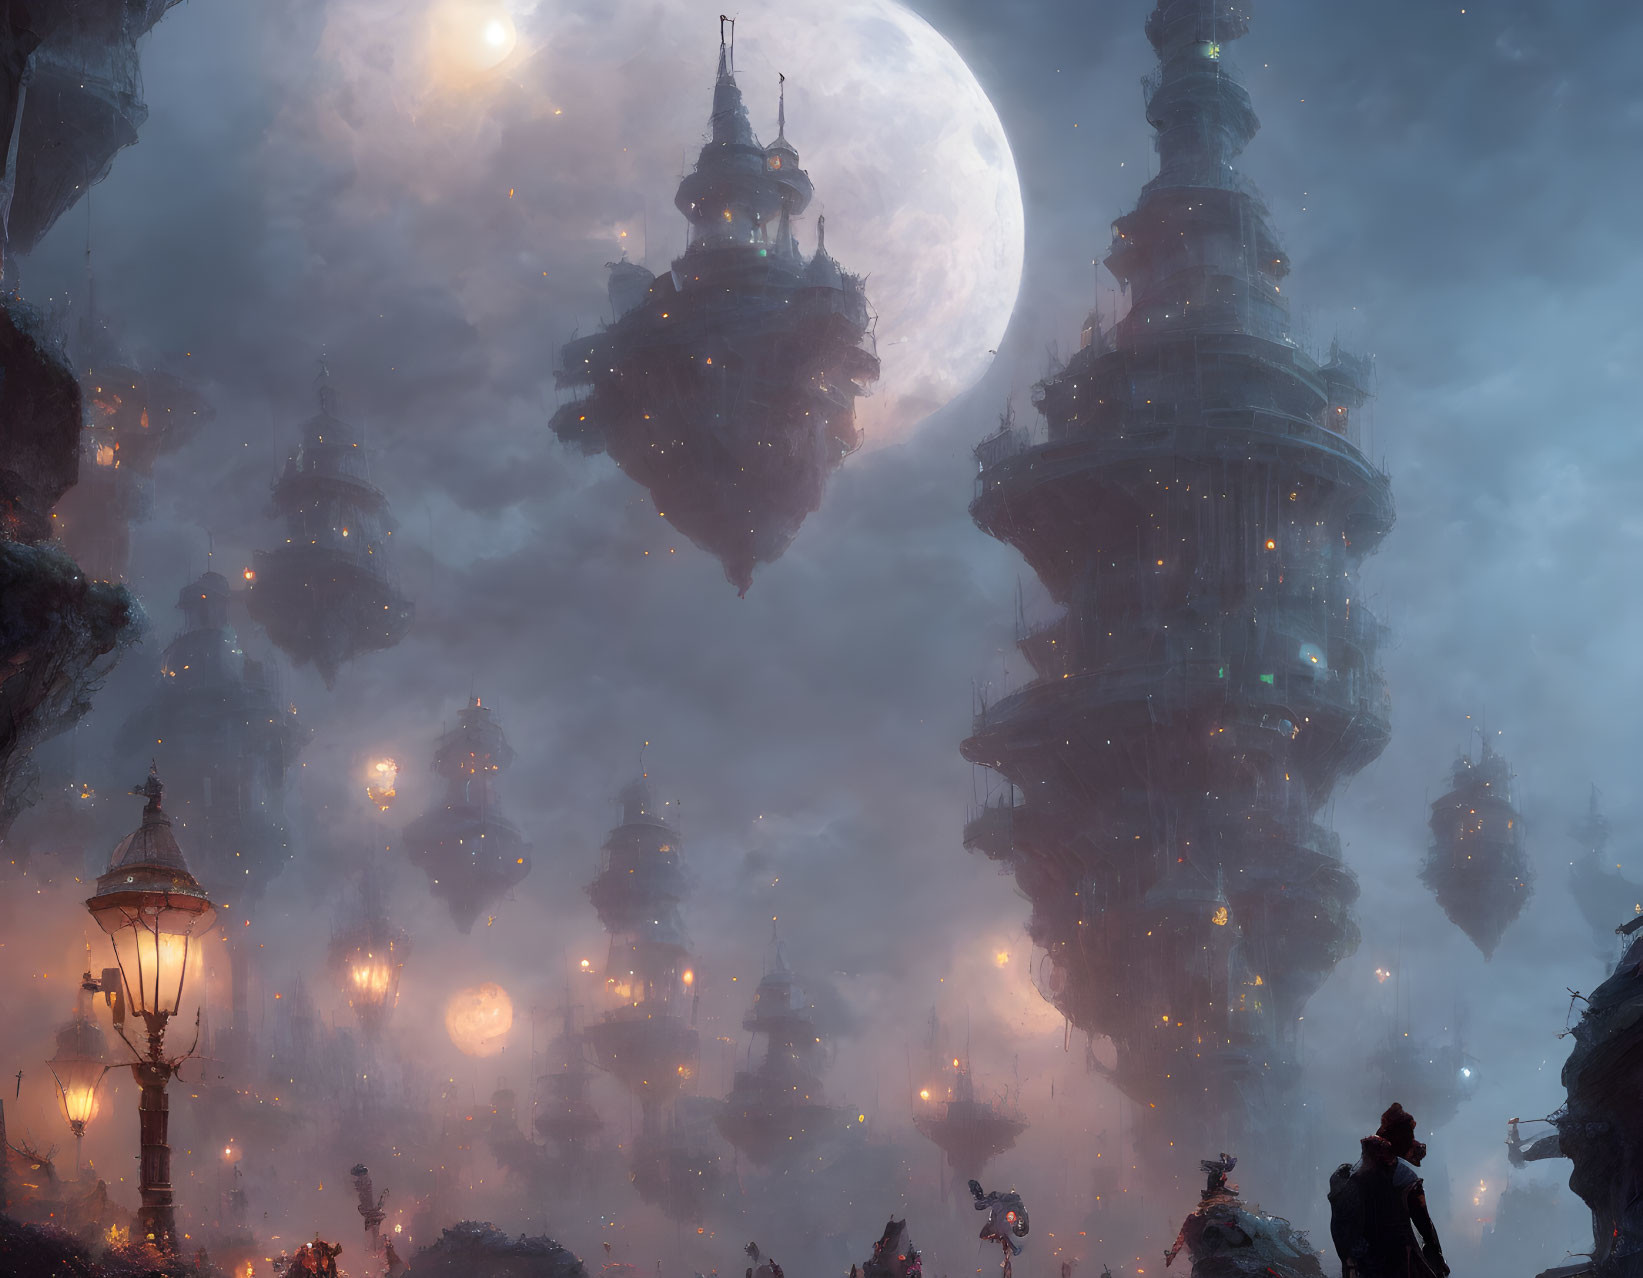 Fantasy cityscape with floating towers under a large moon and misty ambiance illuminated by glowing lanterns